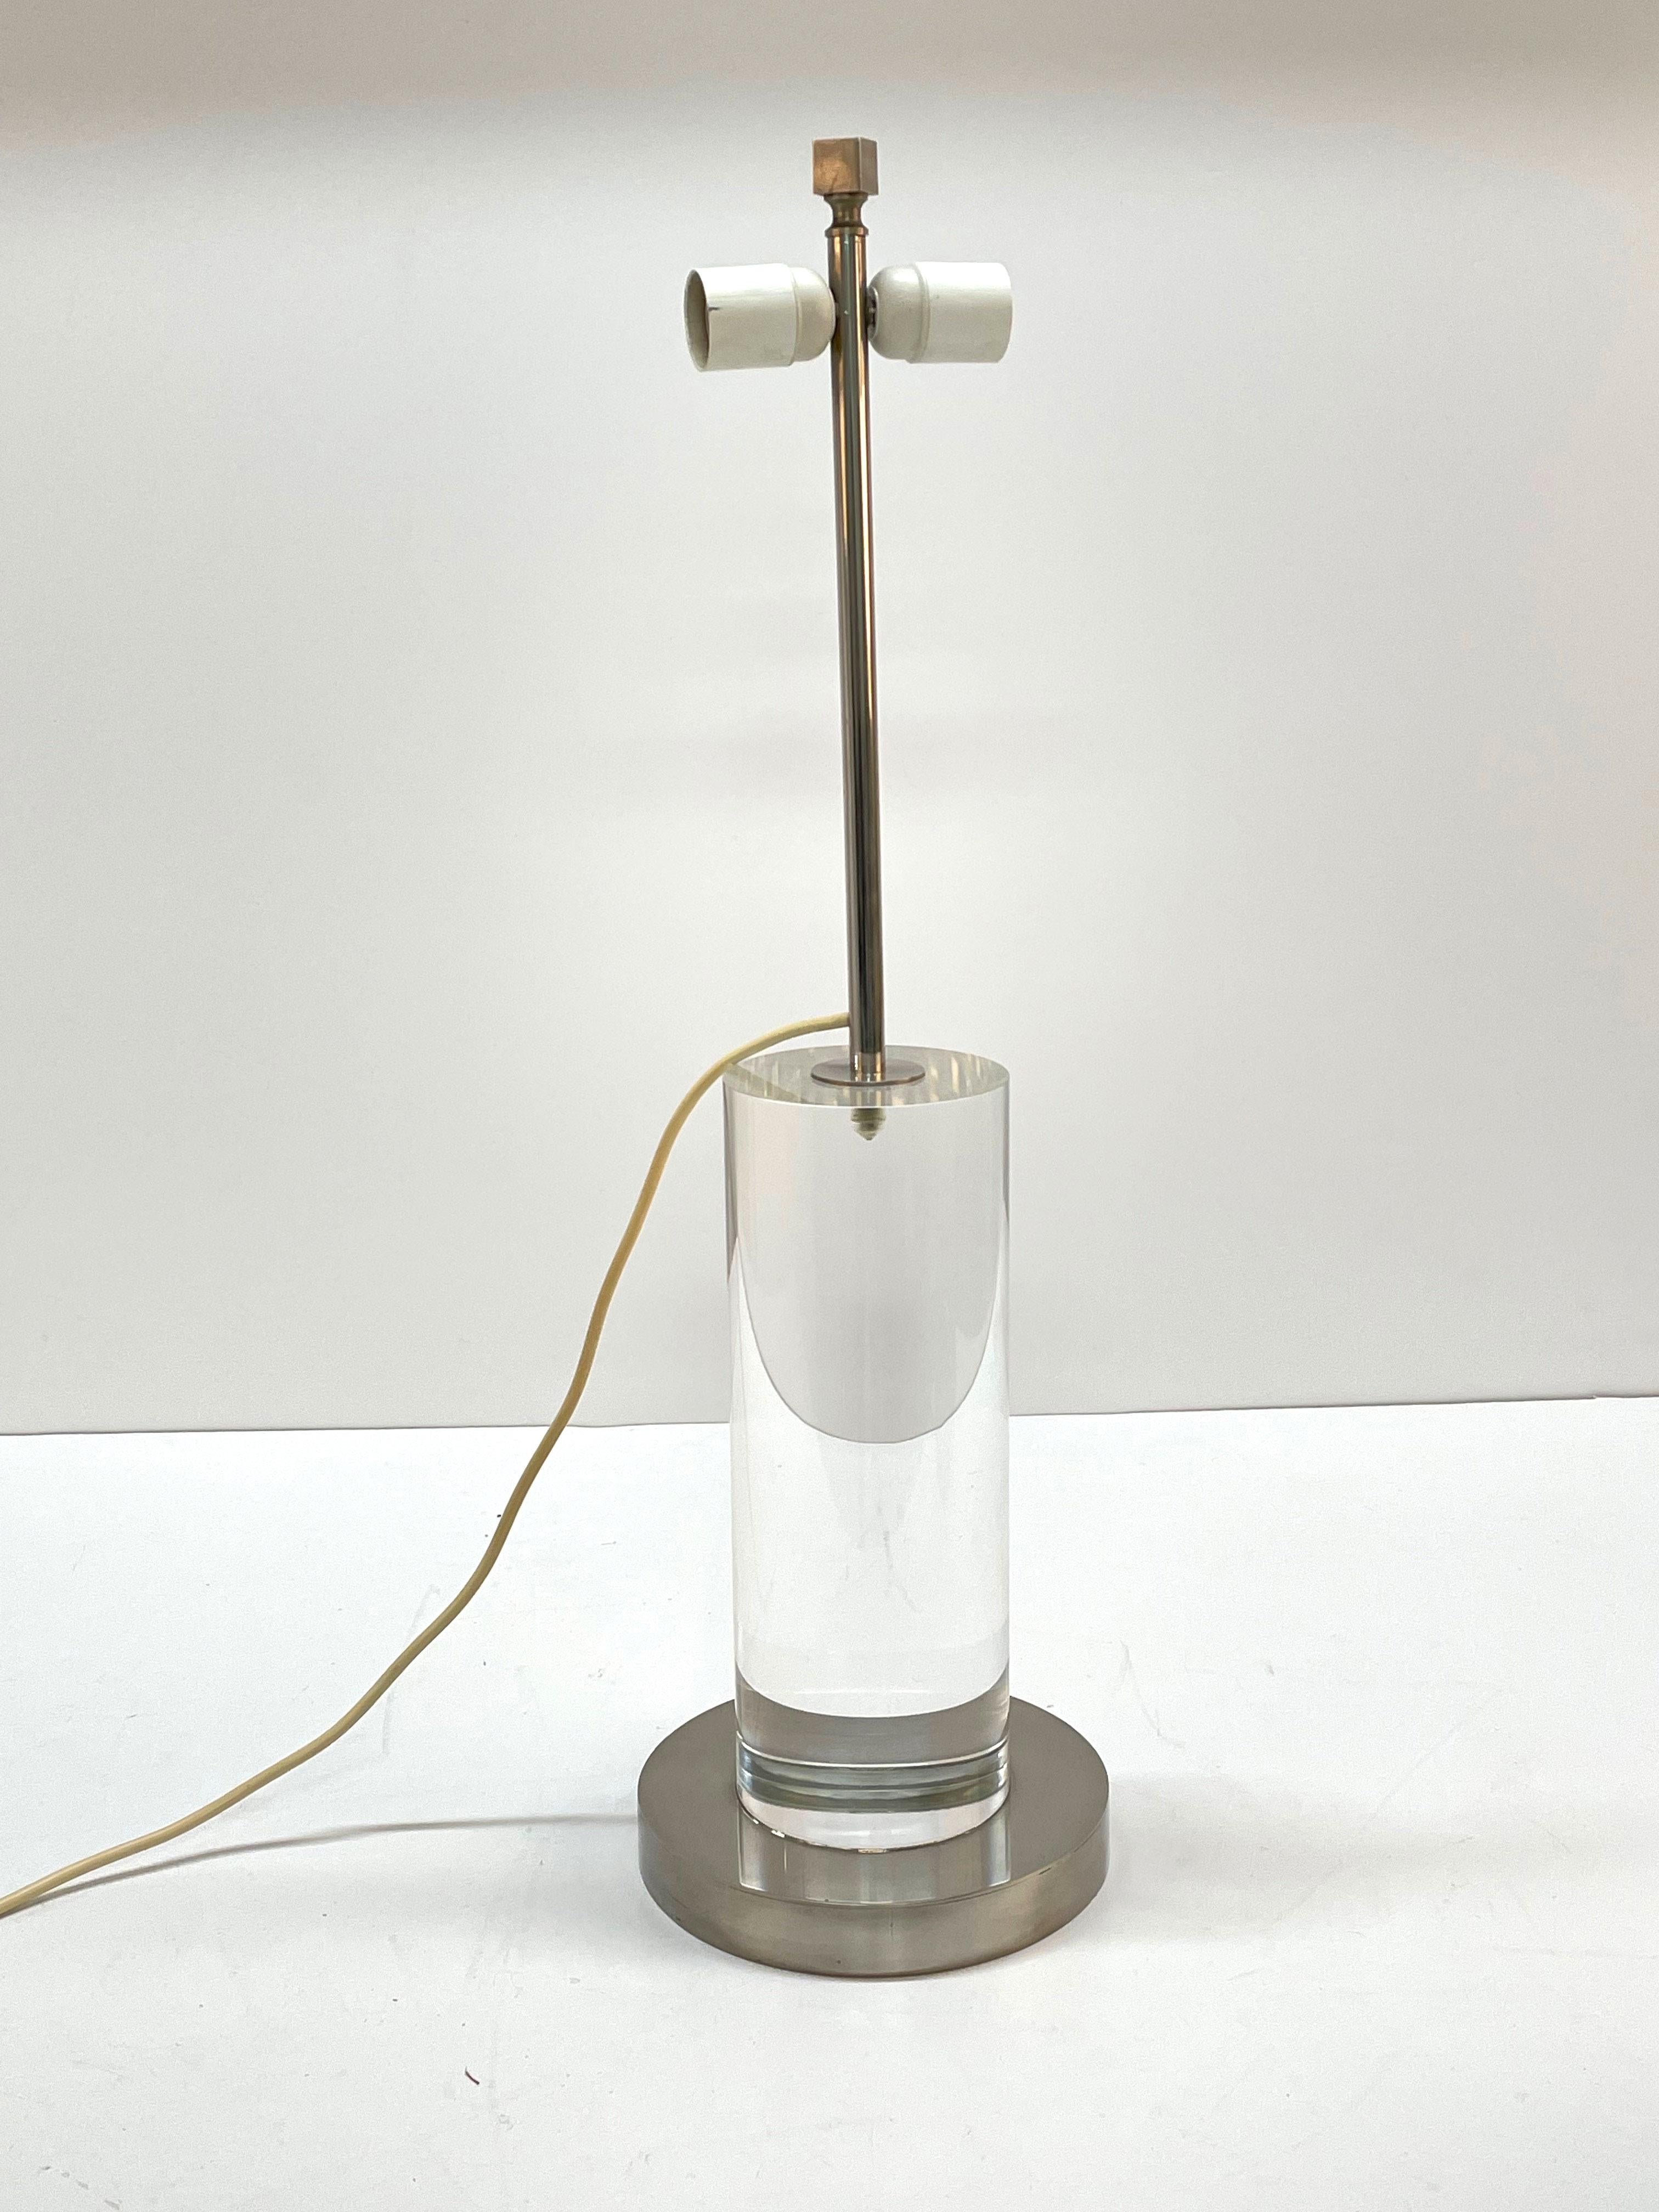 Romeo Rega Midcentury Italian Table Lamp with Lucite Column and Brass Base 1970s For Sale 10